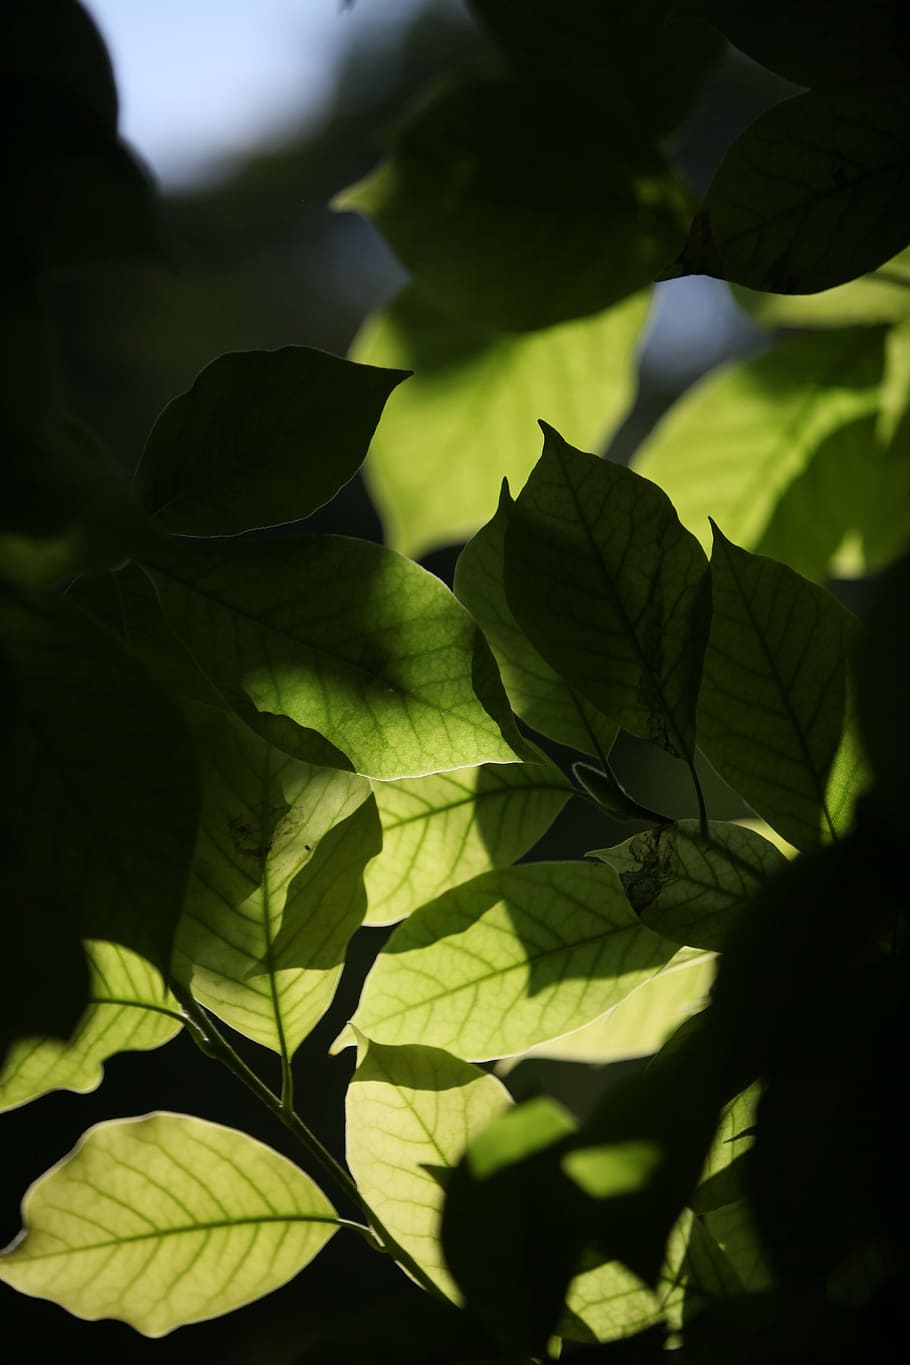 Foliage, Transparency, Against The Light, light, leaf, green color, close-up, outdoors, day, plant part